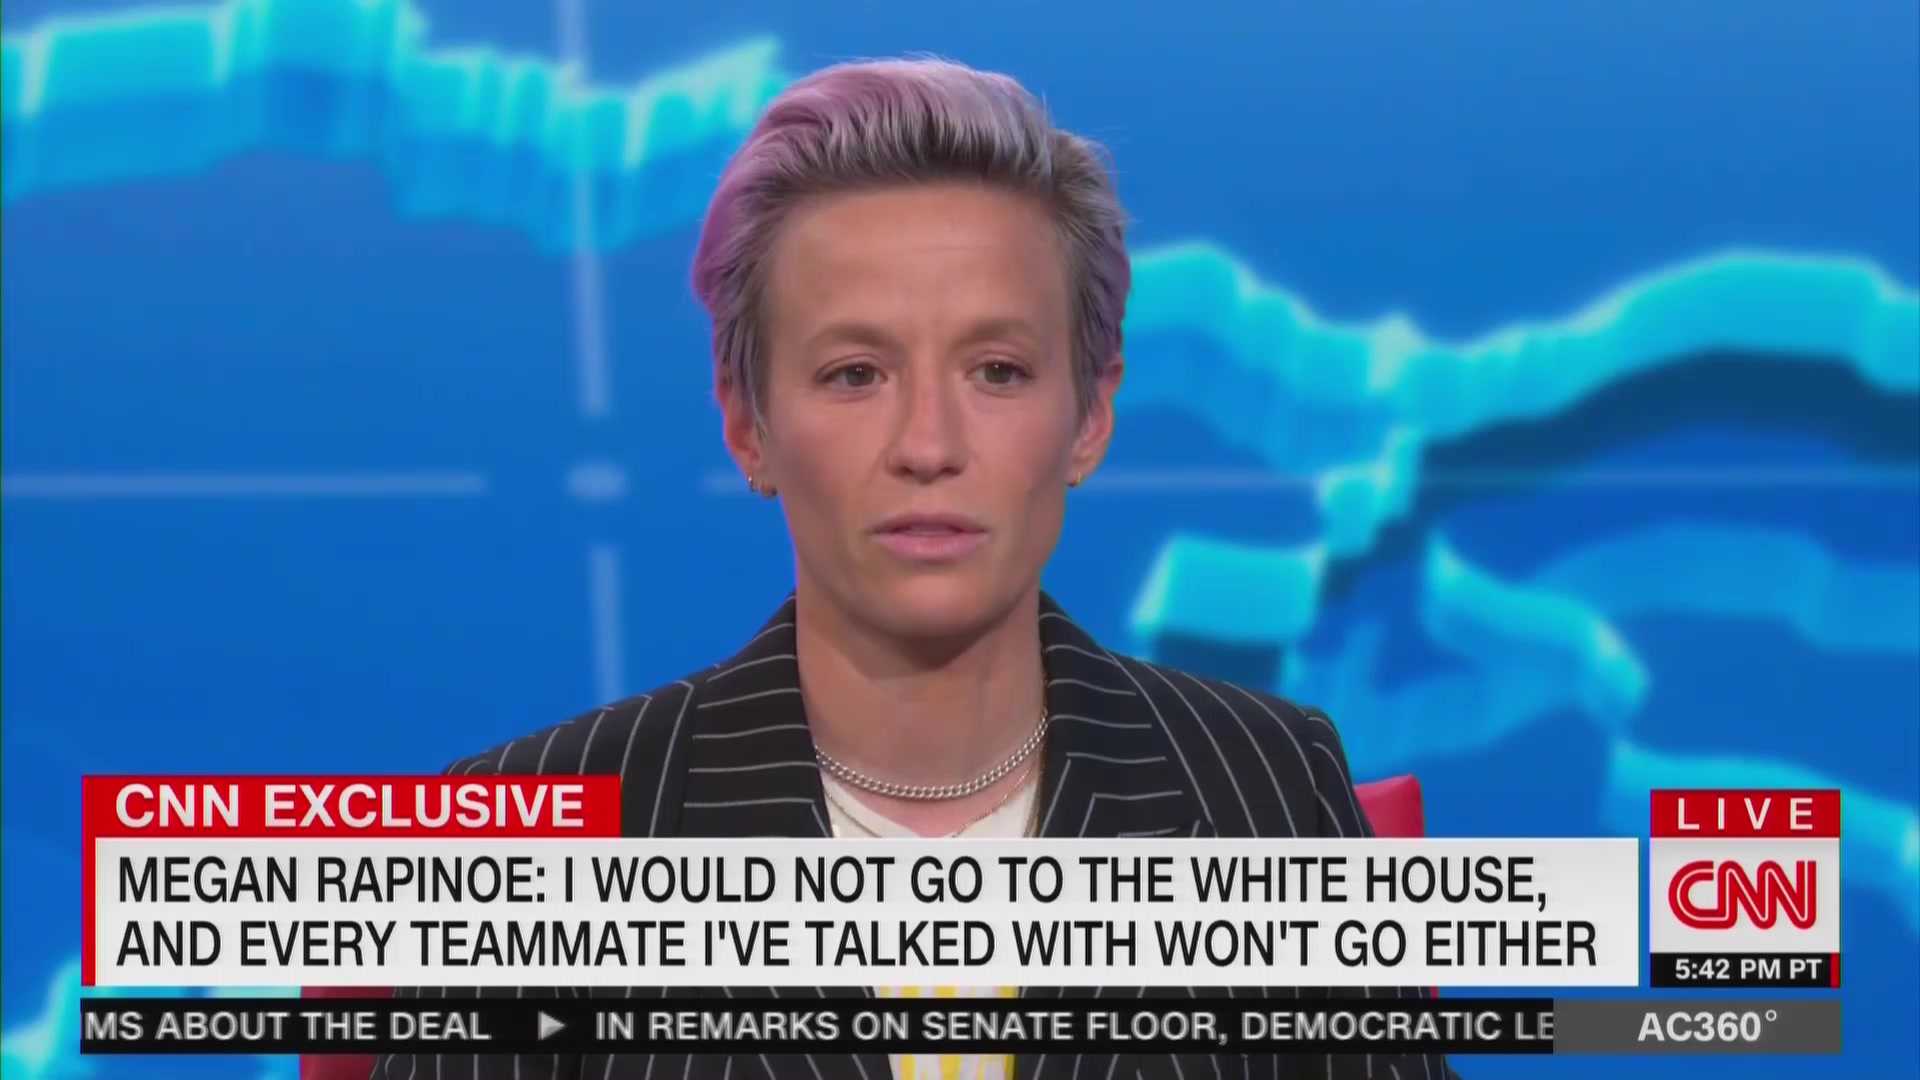 Megan Rapinoe Says Team Won’t Go to White House: We Don’t Want Our Platform ‘Co-Opted or Corrupted’